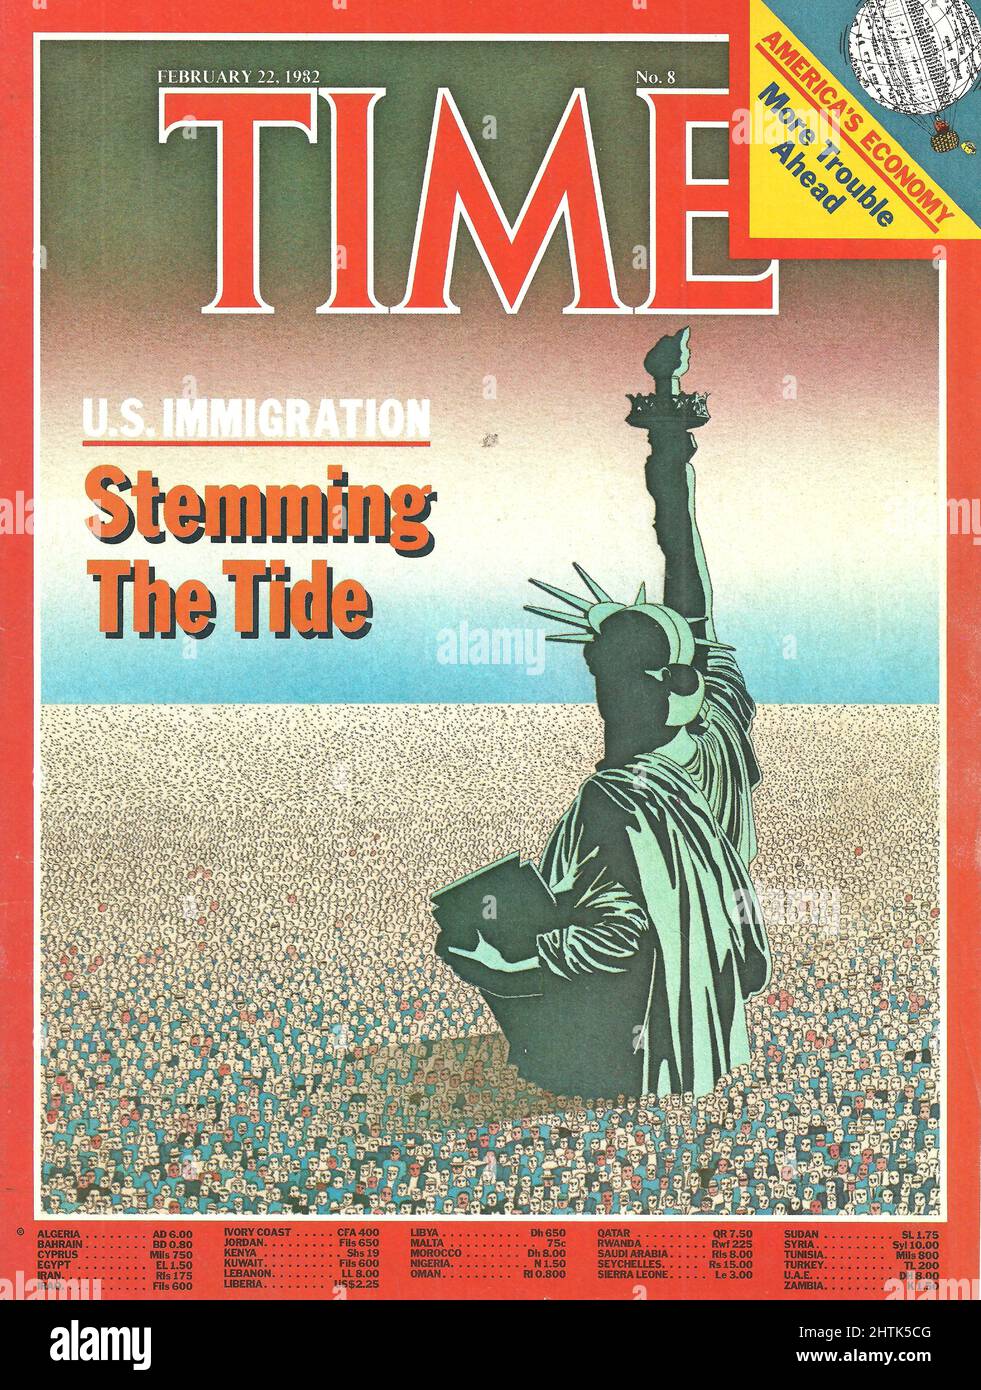 Time magazine cover February 22 1982 US Immigration Stemming the tide America's Economy More Trouble ahead Stock Photo